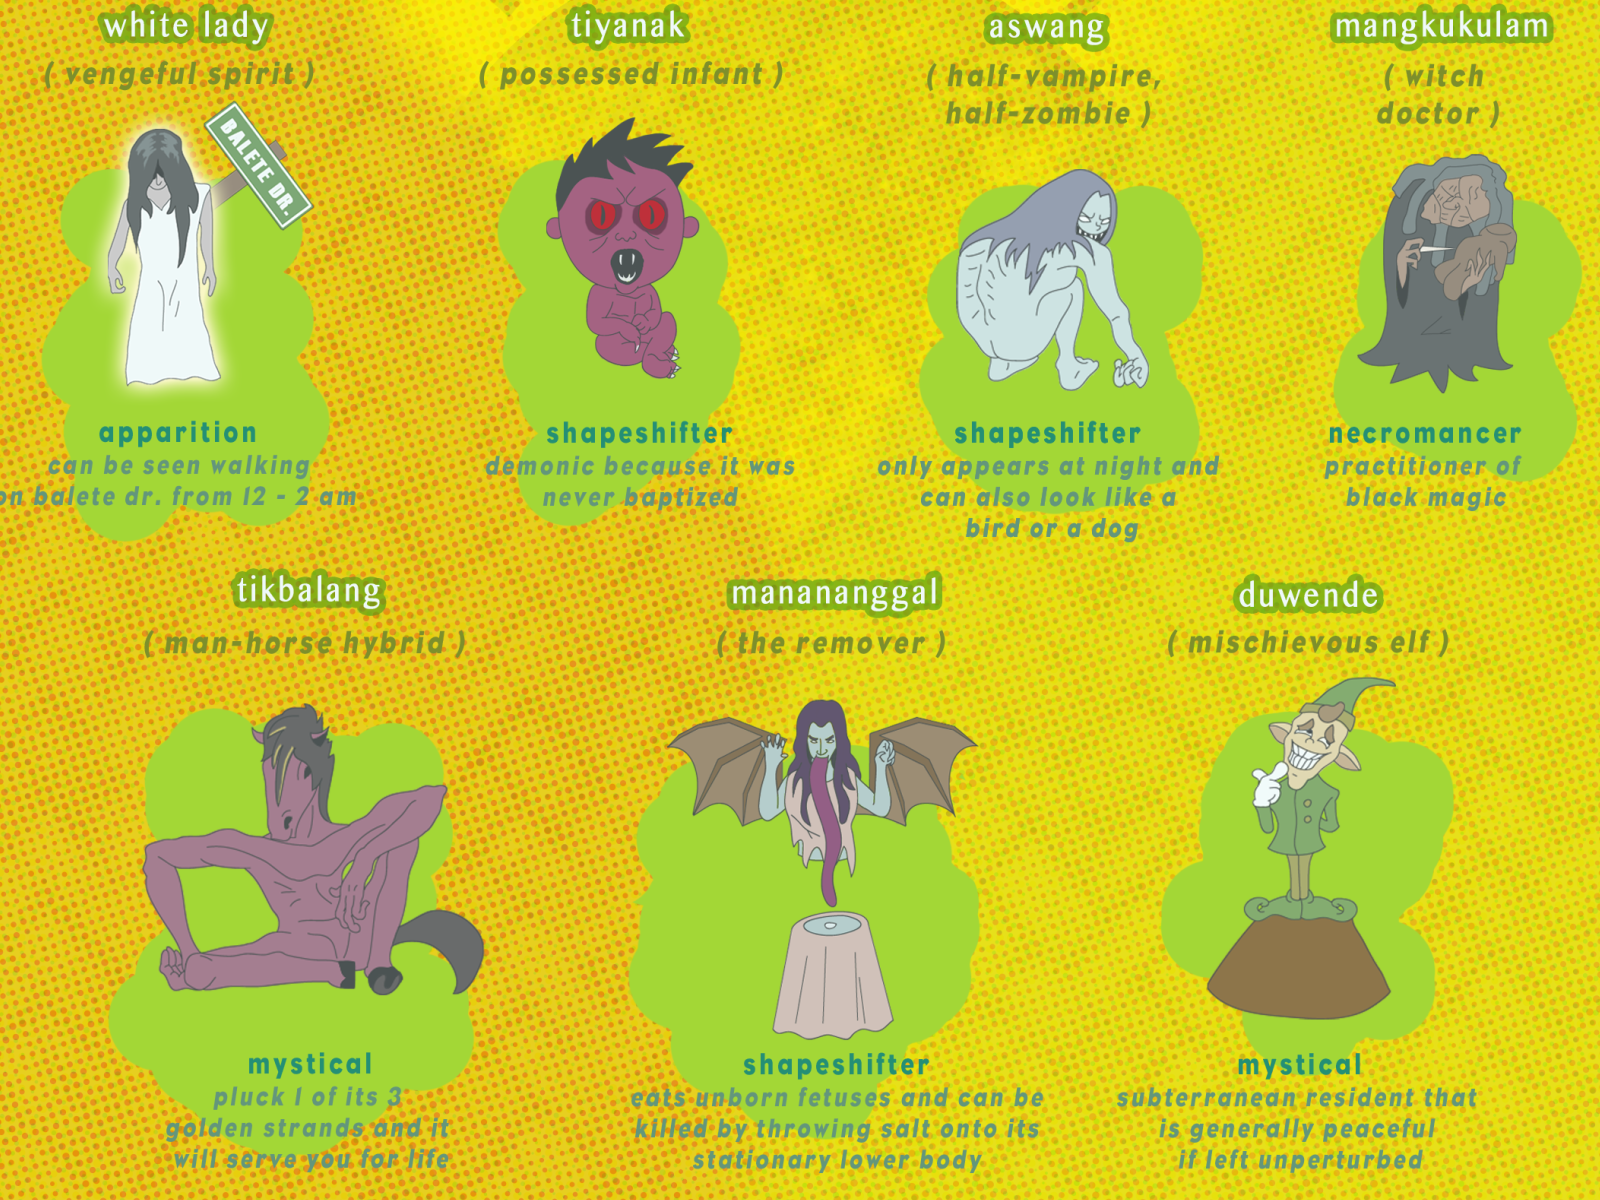 Mythical Creatures of the Philippines by Jerald Apelacio on Dribbble